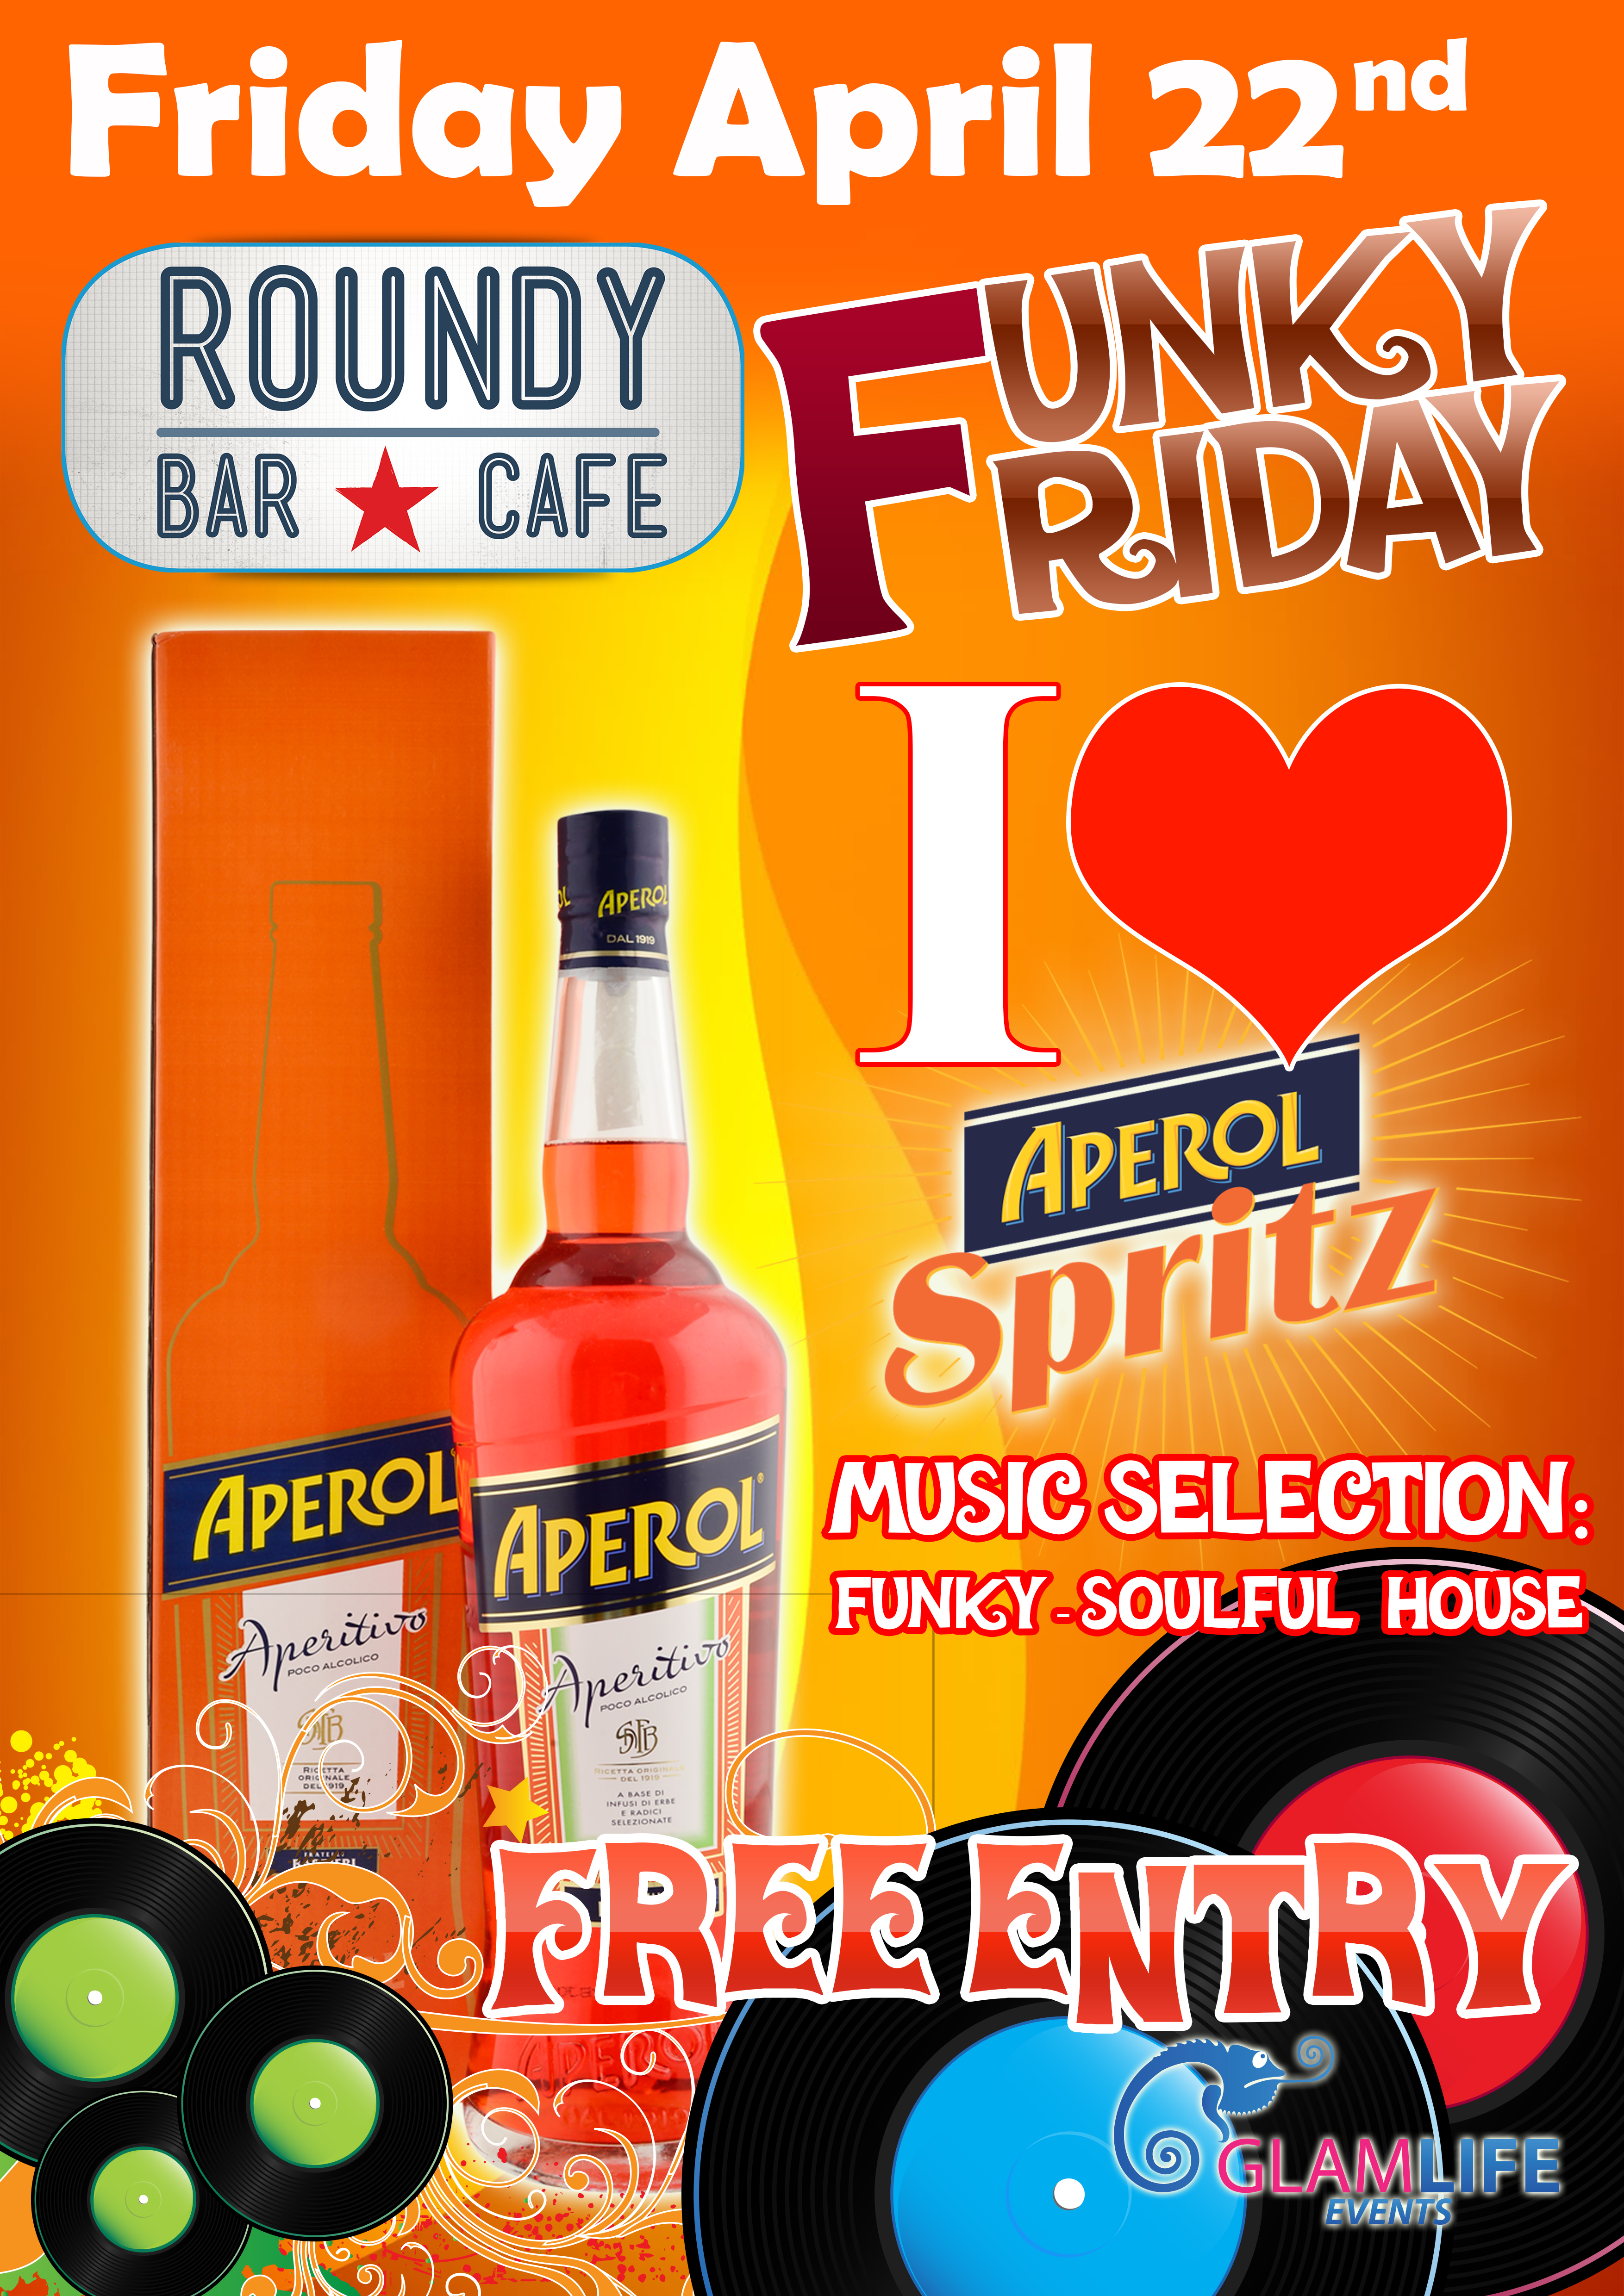 Funky friday april 22nd 2016 The Roundy